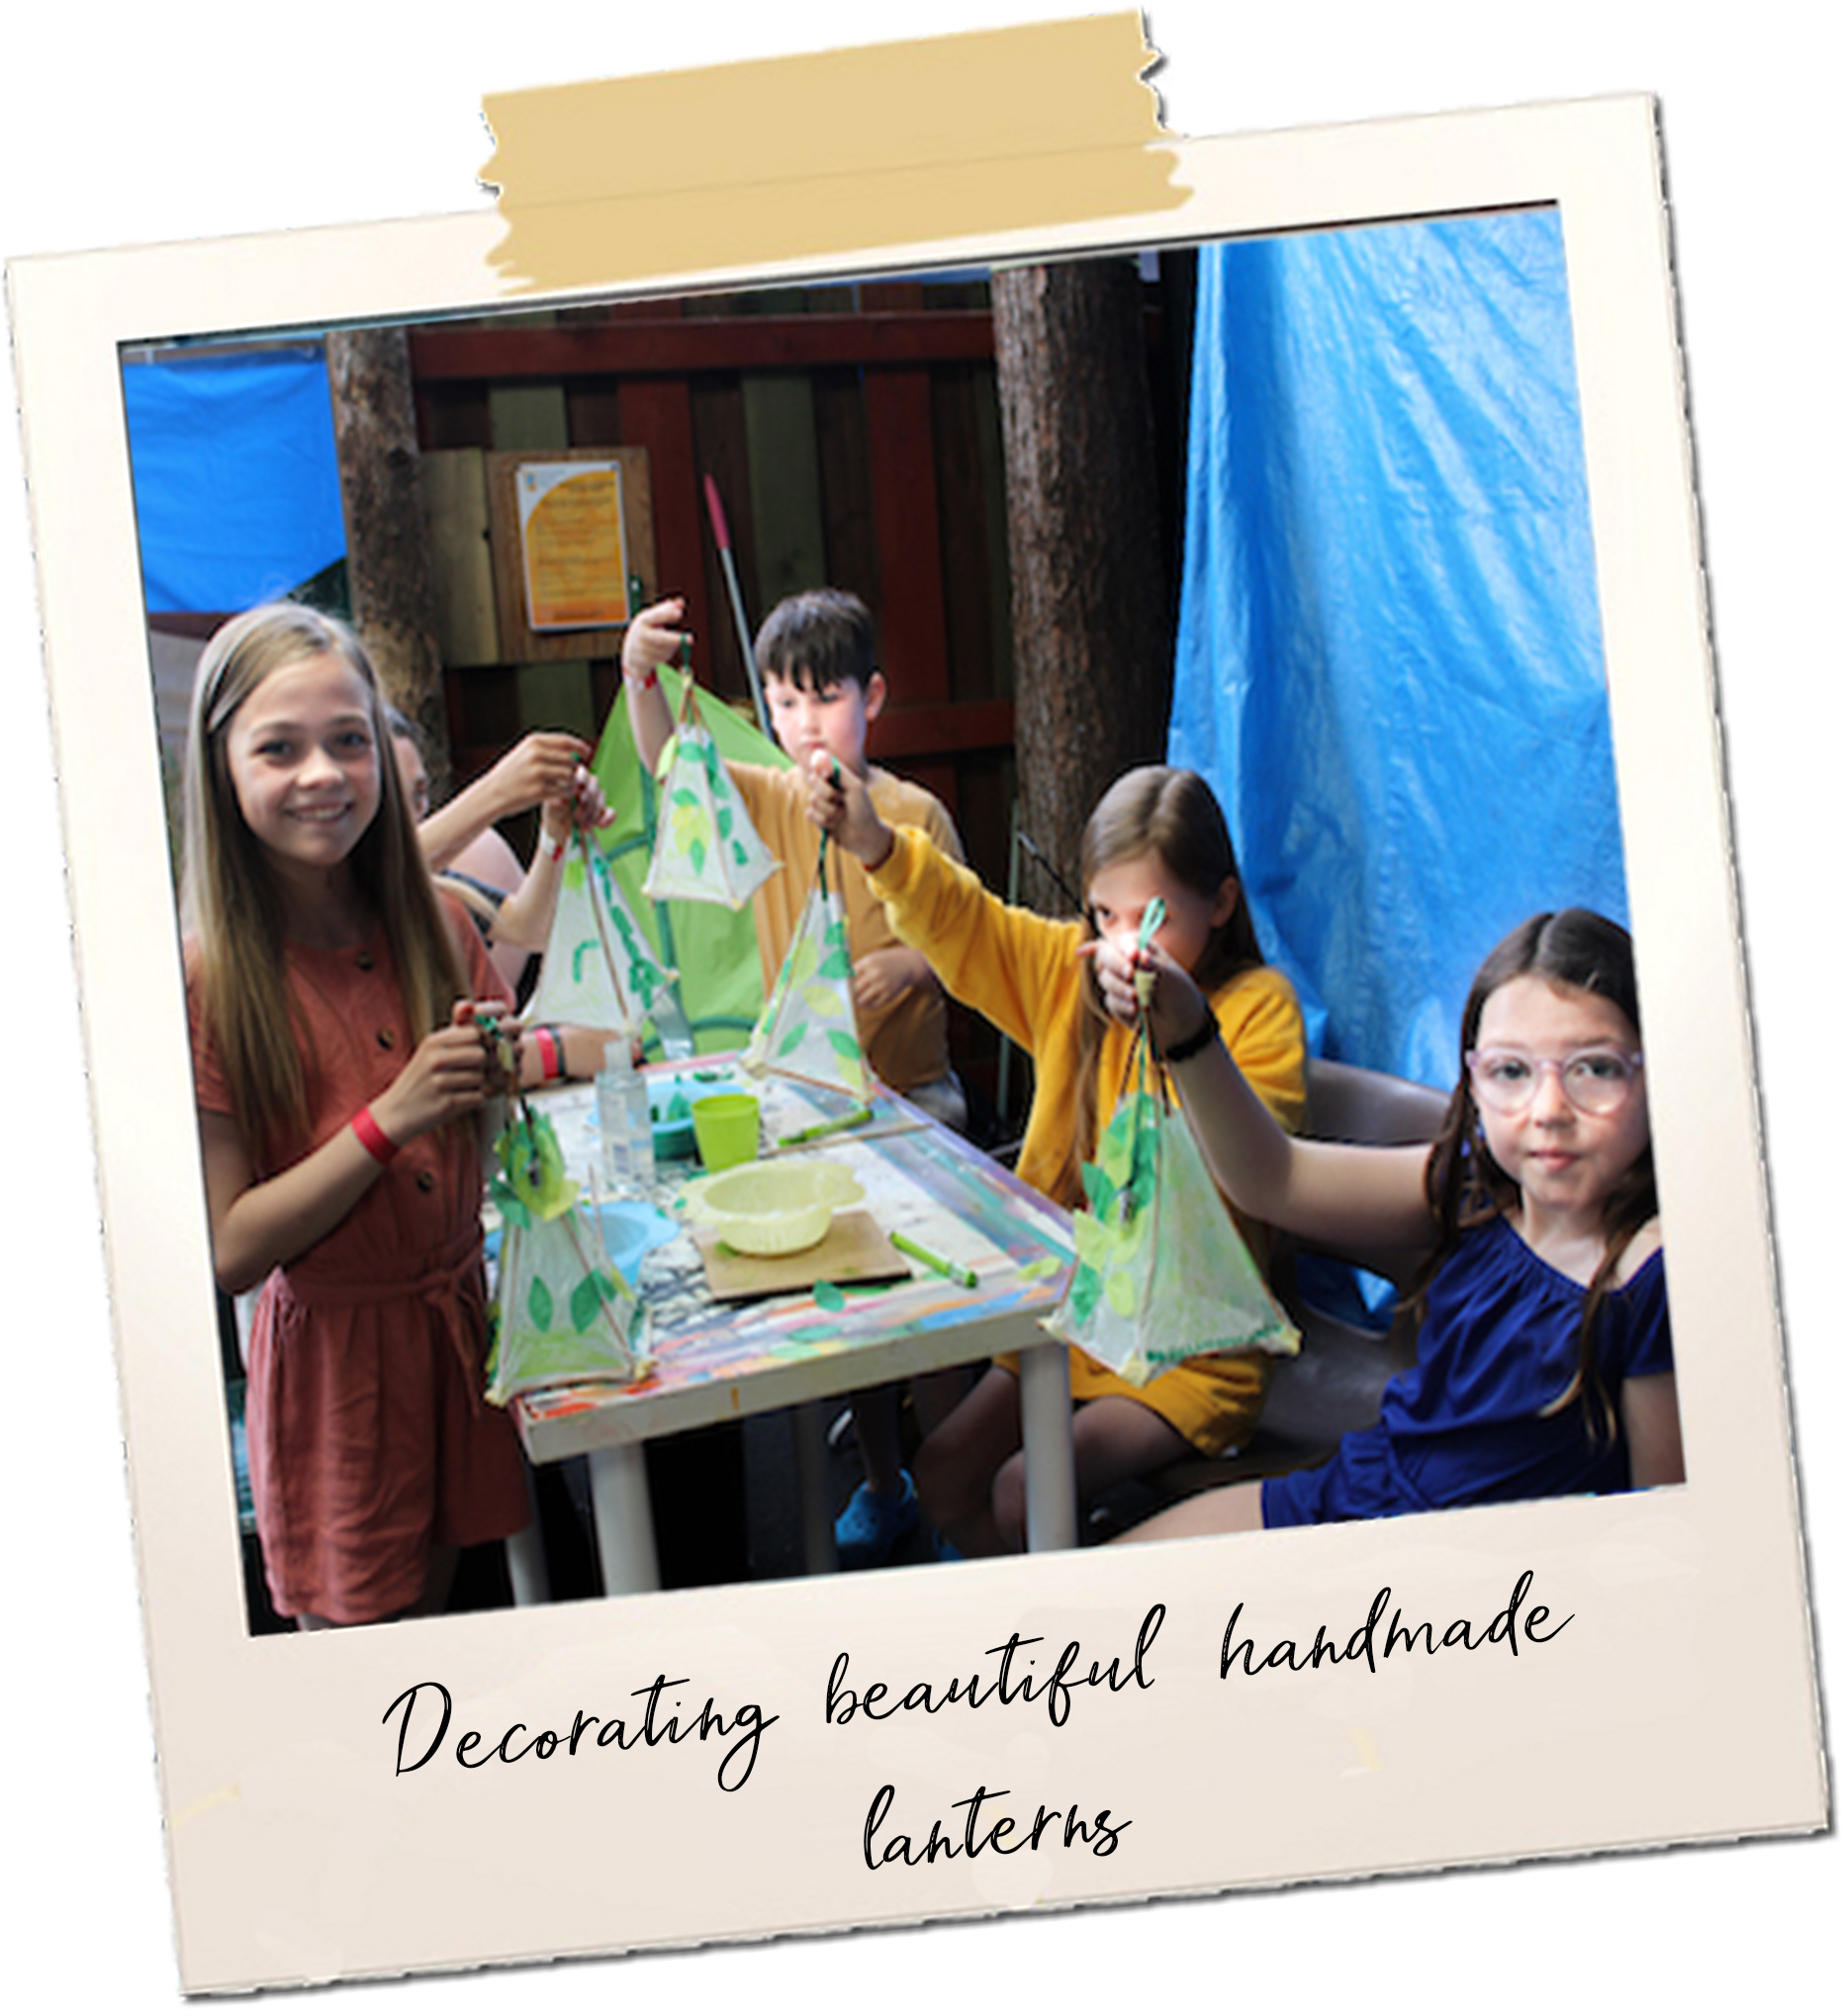 4 young people hold up handmade lanterns decorated with leaves